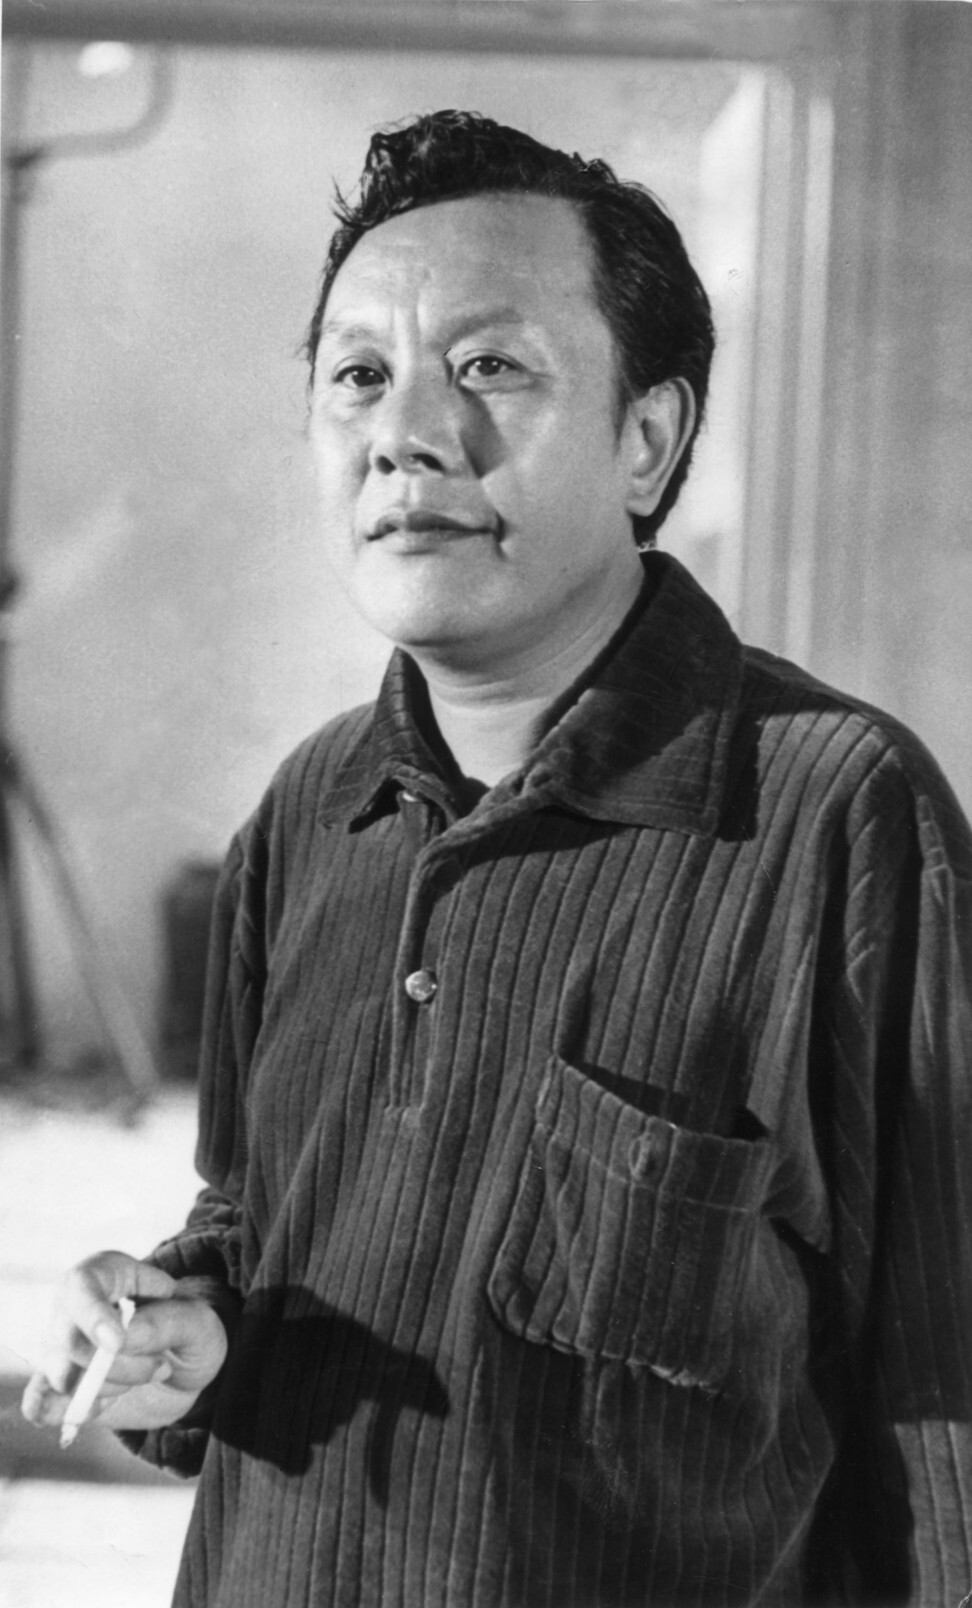 Chang Cheh directed One-Armed Swordsman, released in 1967.